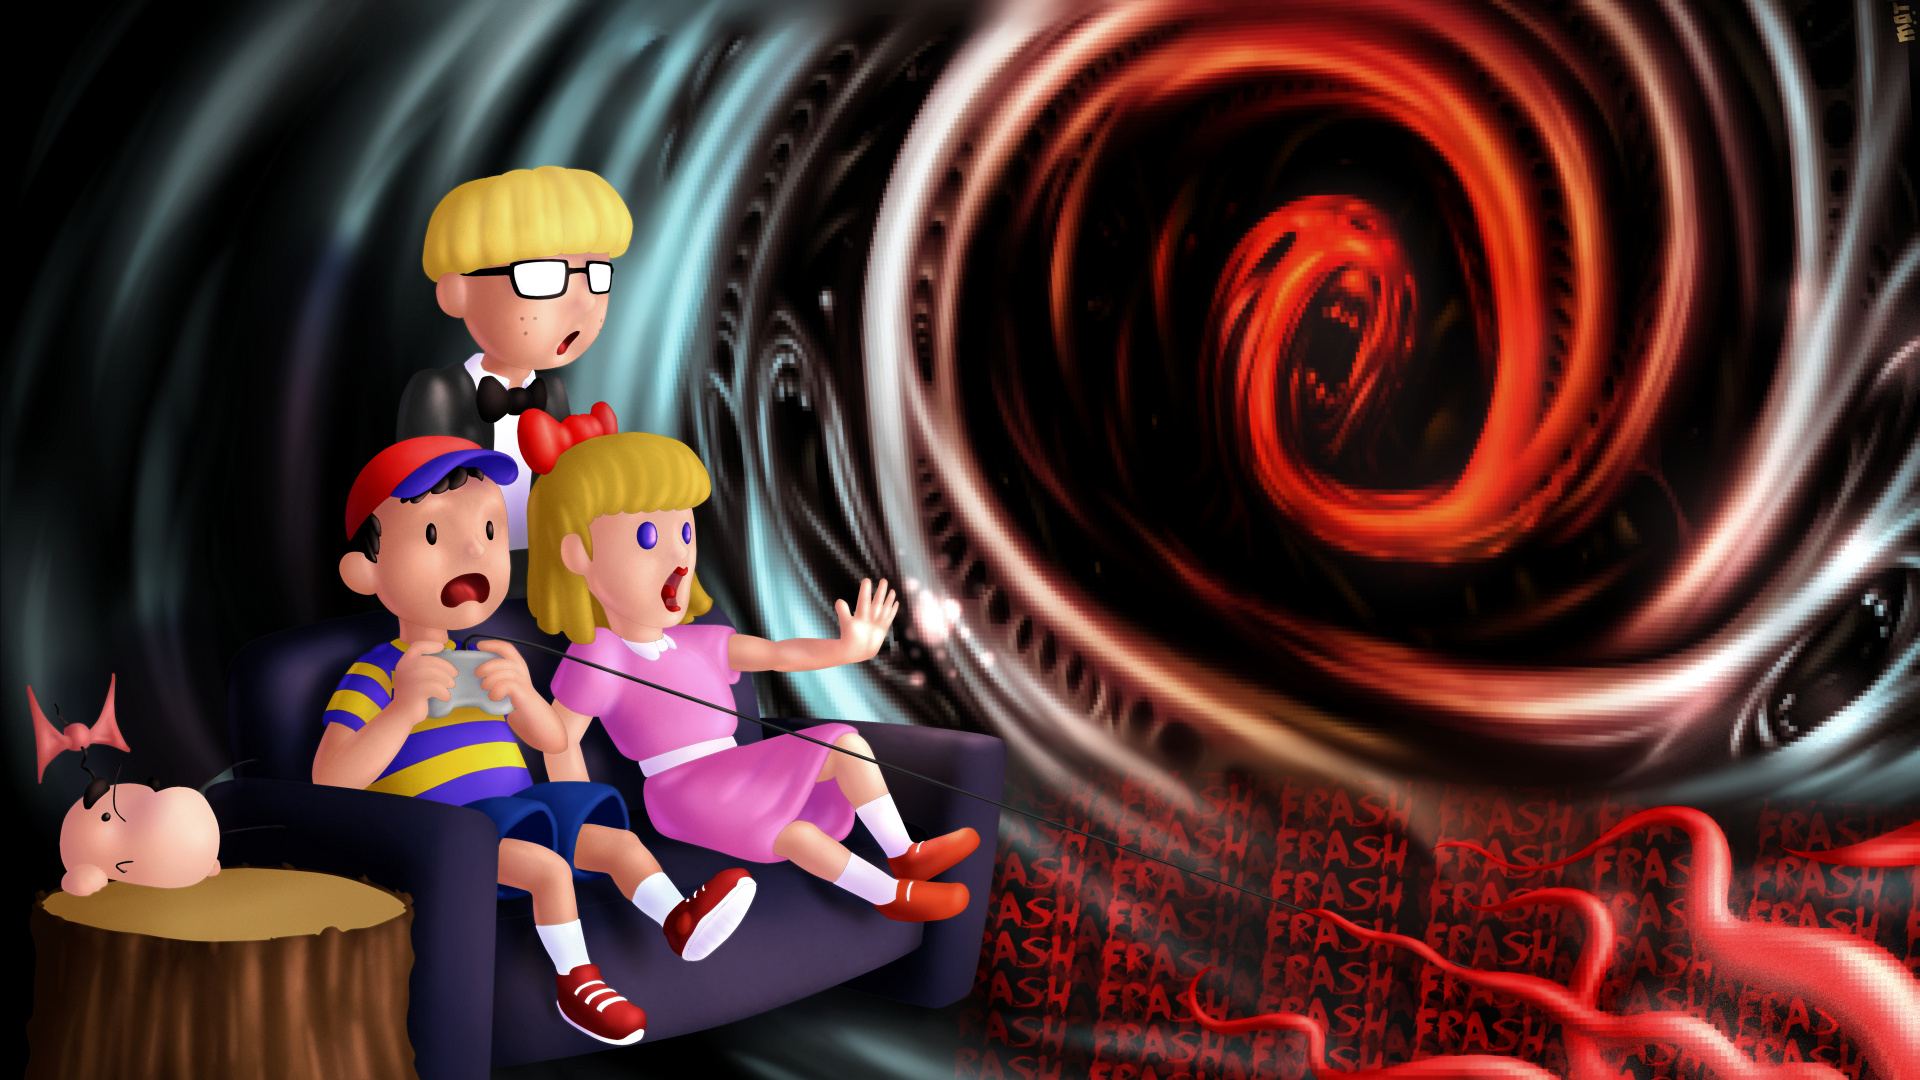 Ness Earthbound Images Crazy Gallery 1920x1080